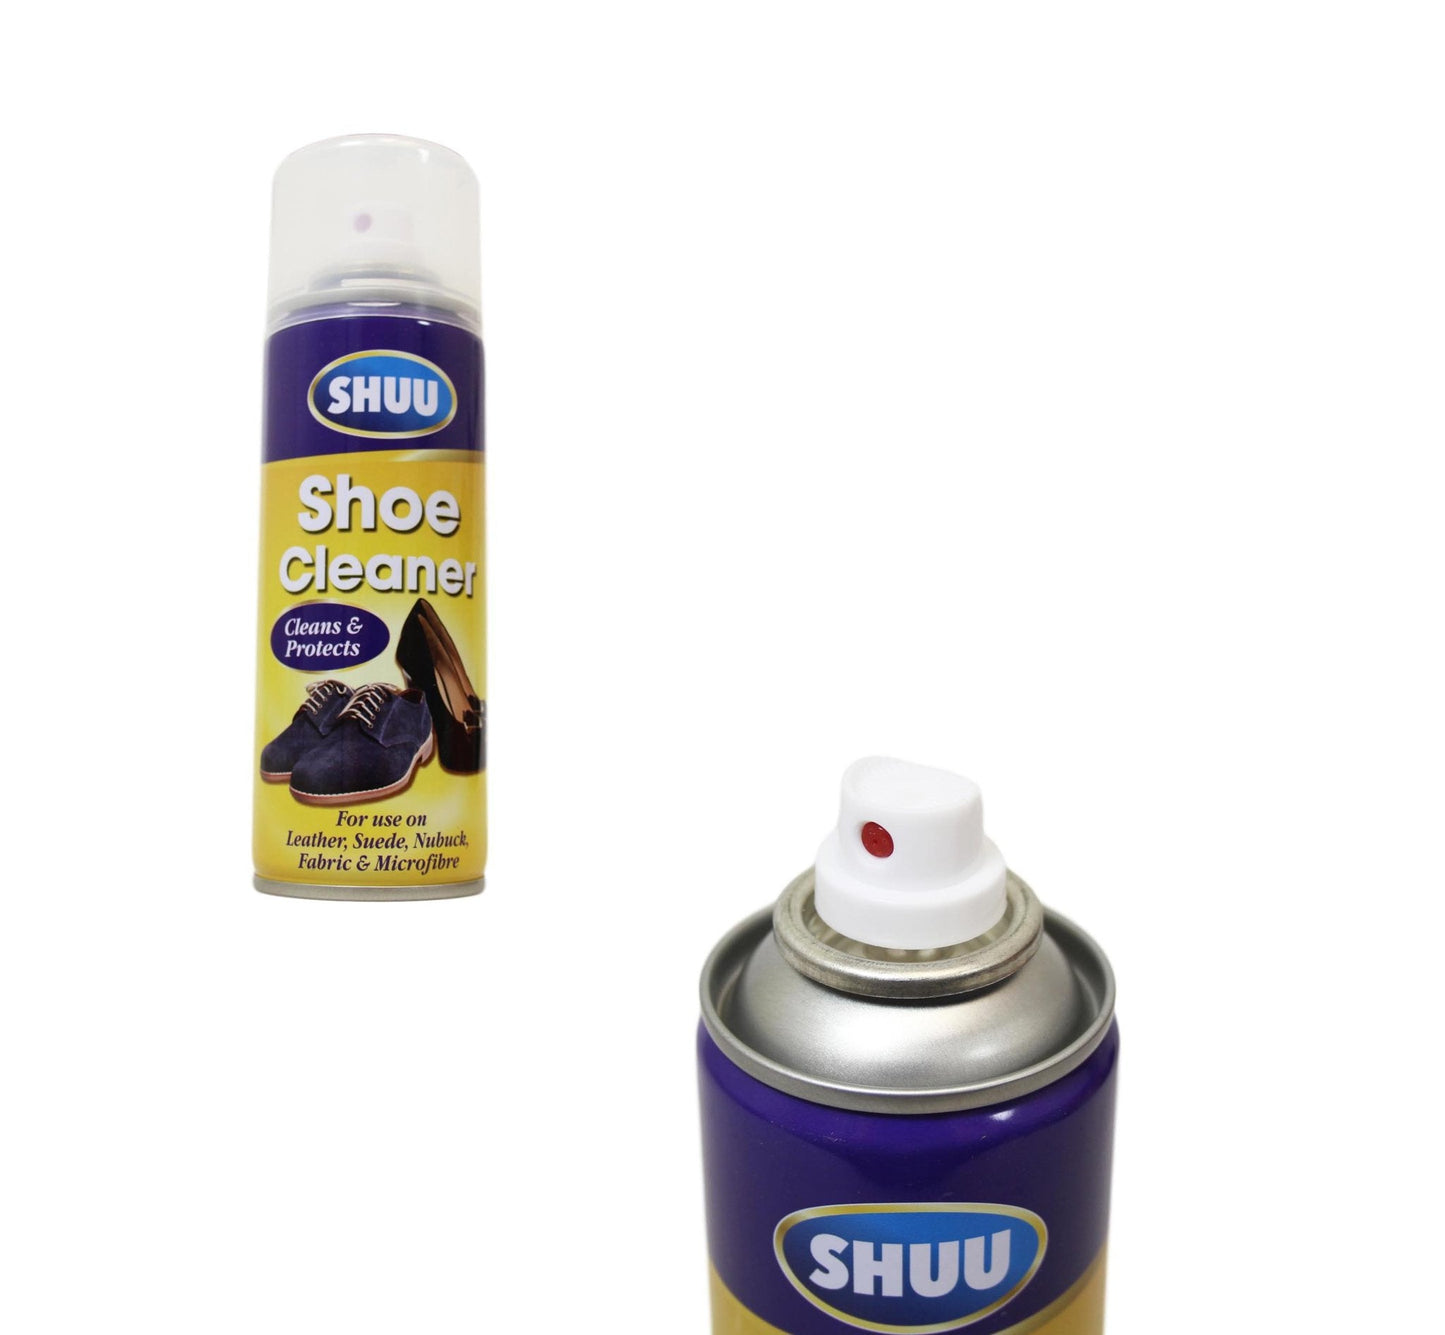 Shuu Shoe Cleaner 300ml Cleans and Protects Shoes Ideal for Leather, Suede, Nubuck and Fabric 4503  (Parcel Rate)